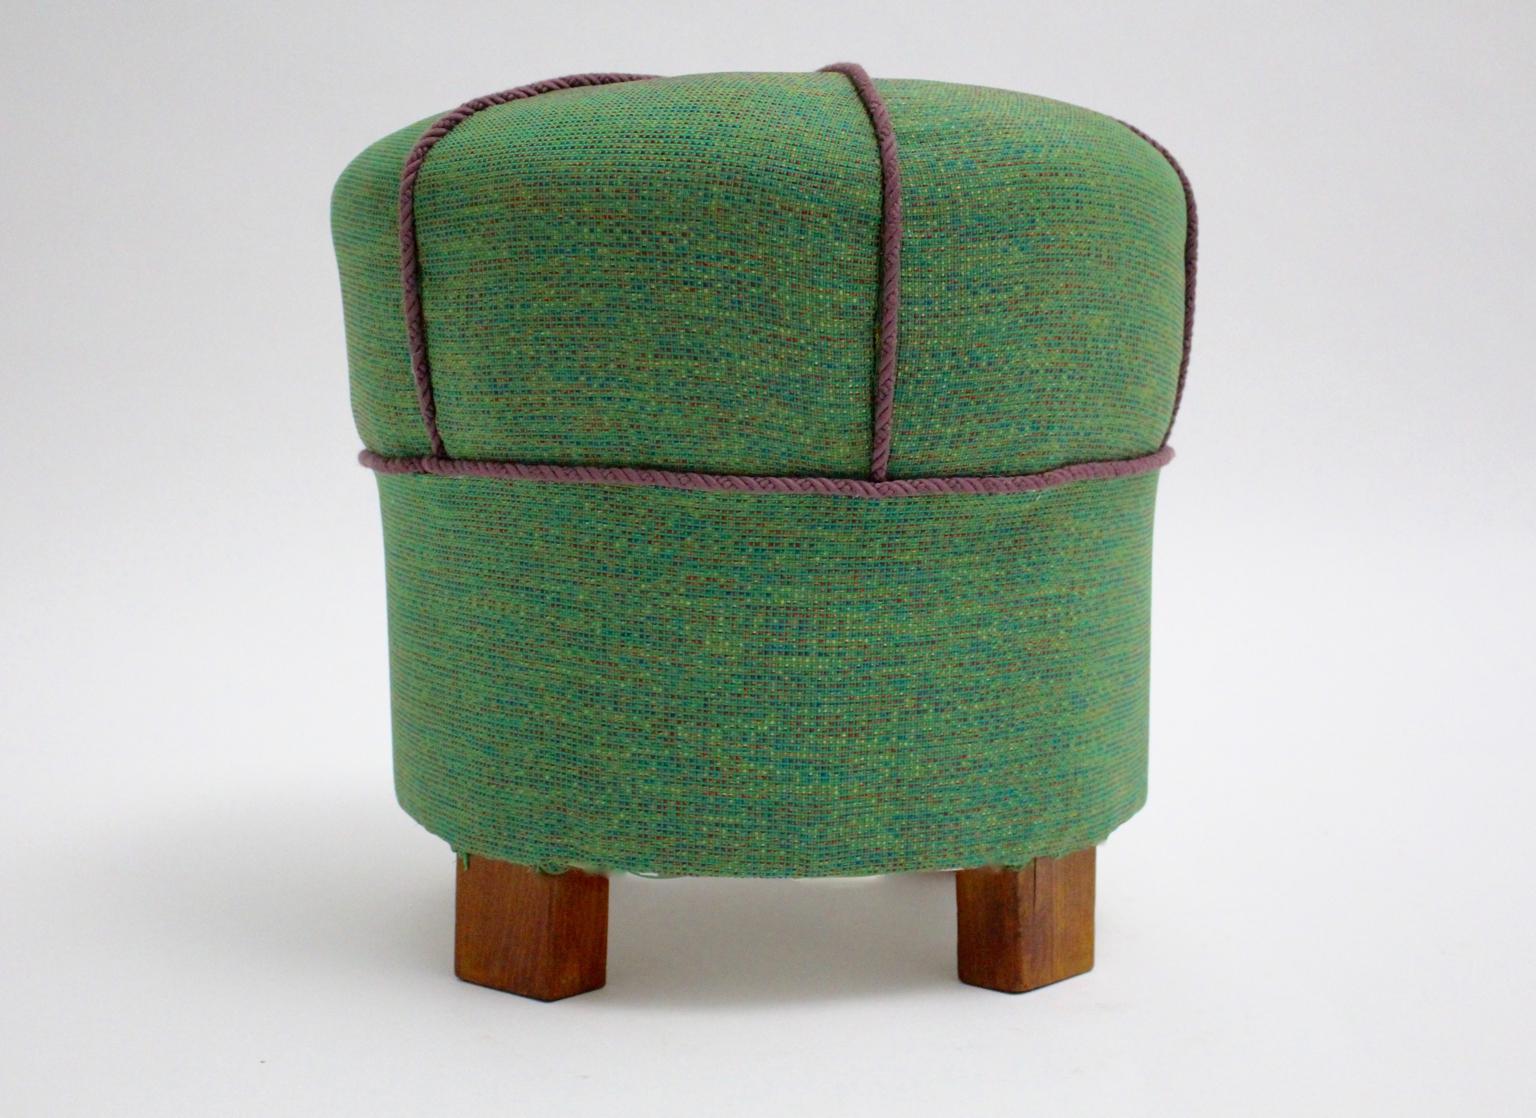 Charming Art Deco pouf, stool or tabouret. The tabouret is newly covered with green textile fabric and decorated with violet cords.
The stool features walnut feet.
all measures are approximate